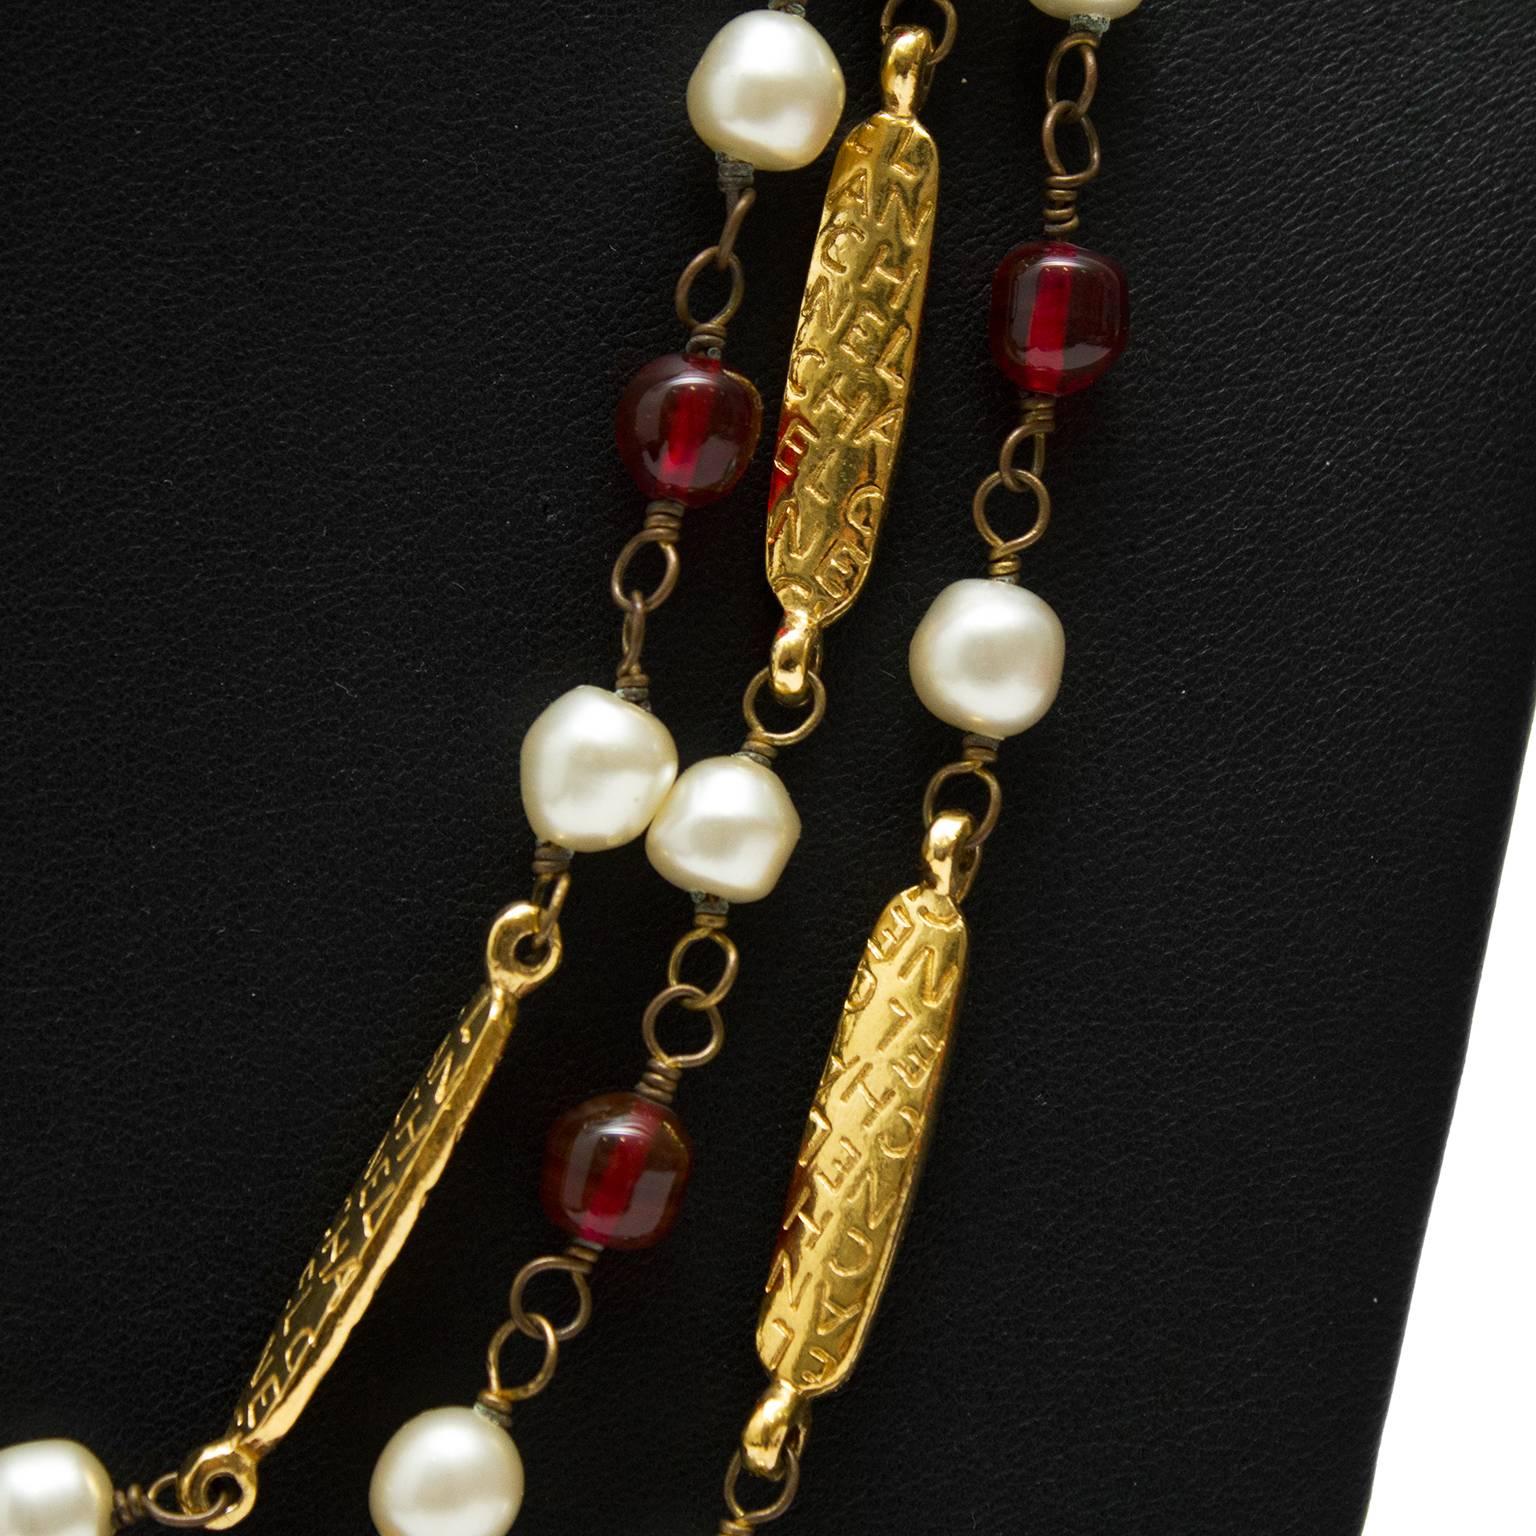 1970’s Chanel long necklace featuring pearls, red poured glass beads and long gold beads with CHANEL stamped repeatedly. Can be worn long or looped many different times. Beautiful piece featuring every aspect that Chanel jewellery is known for;